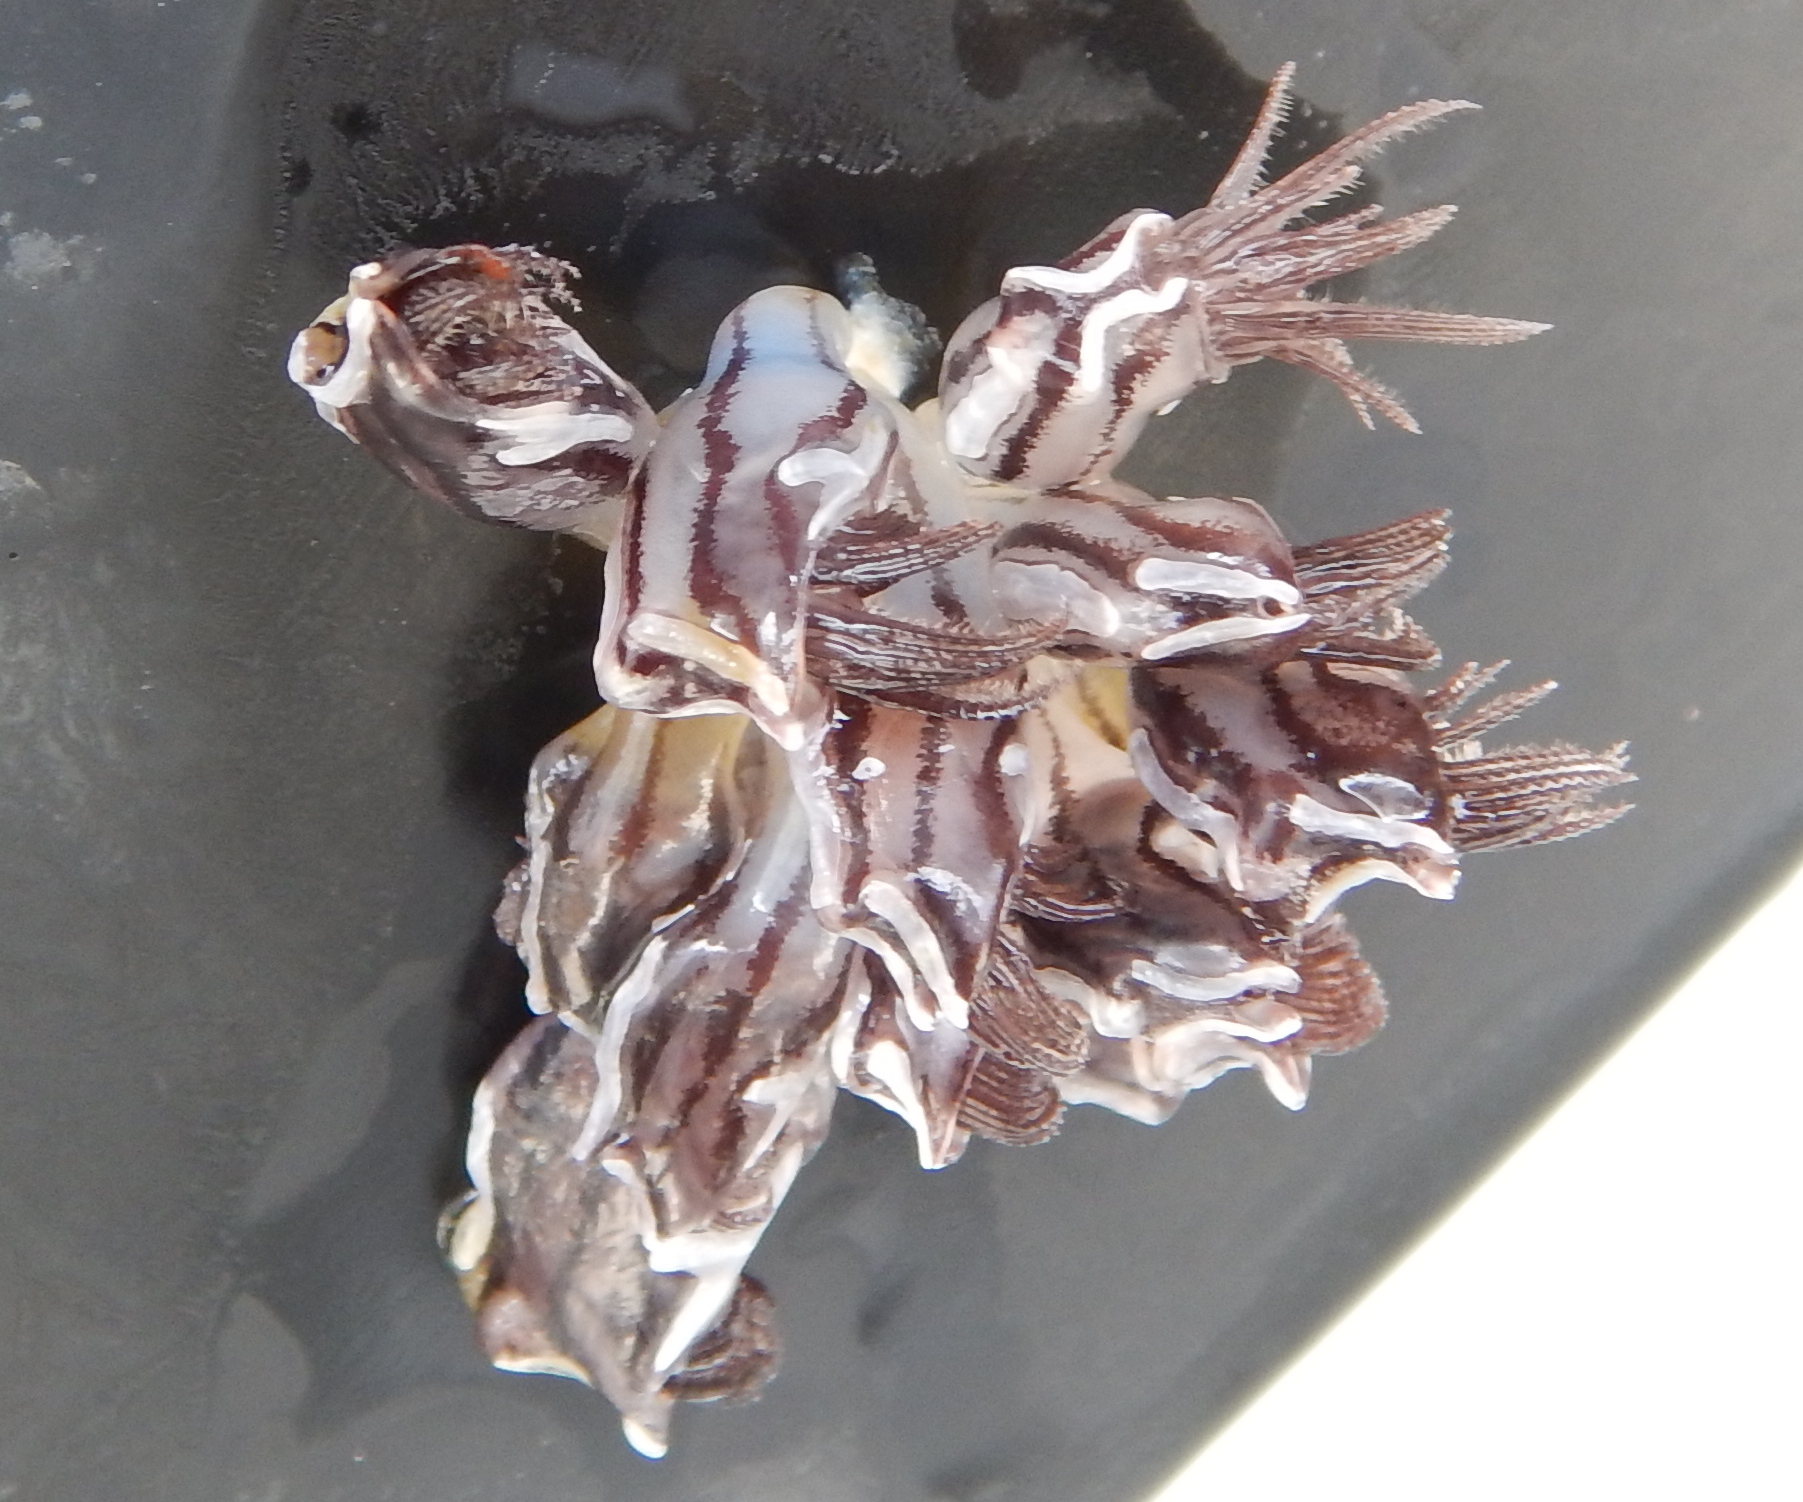  A striped gooseneck barnacle on the float (Conchederma Virgatum).    